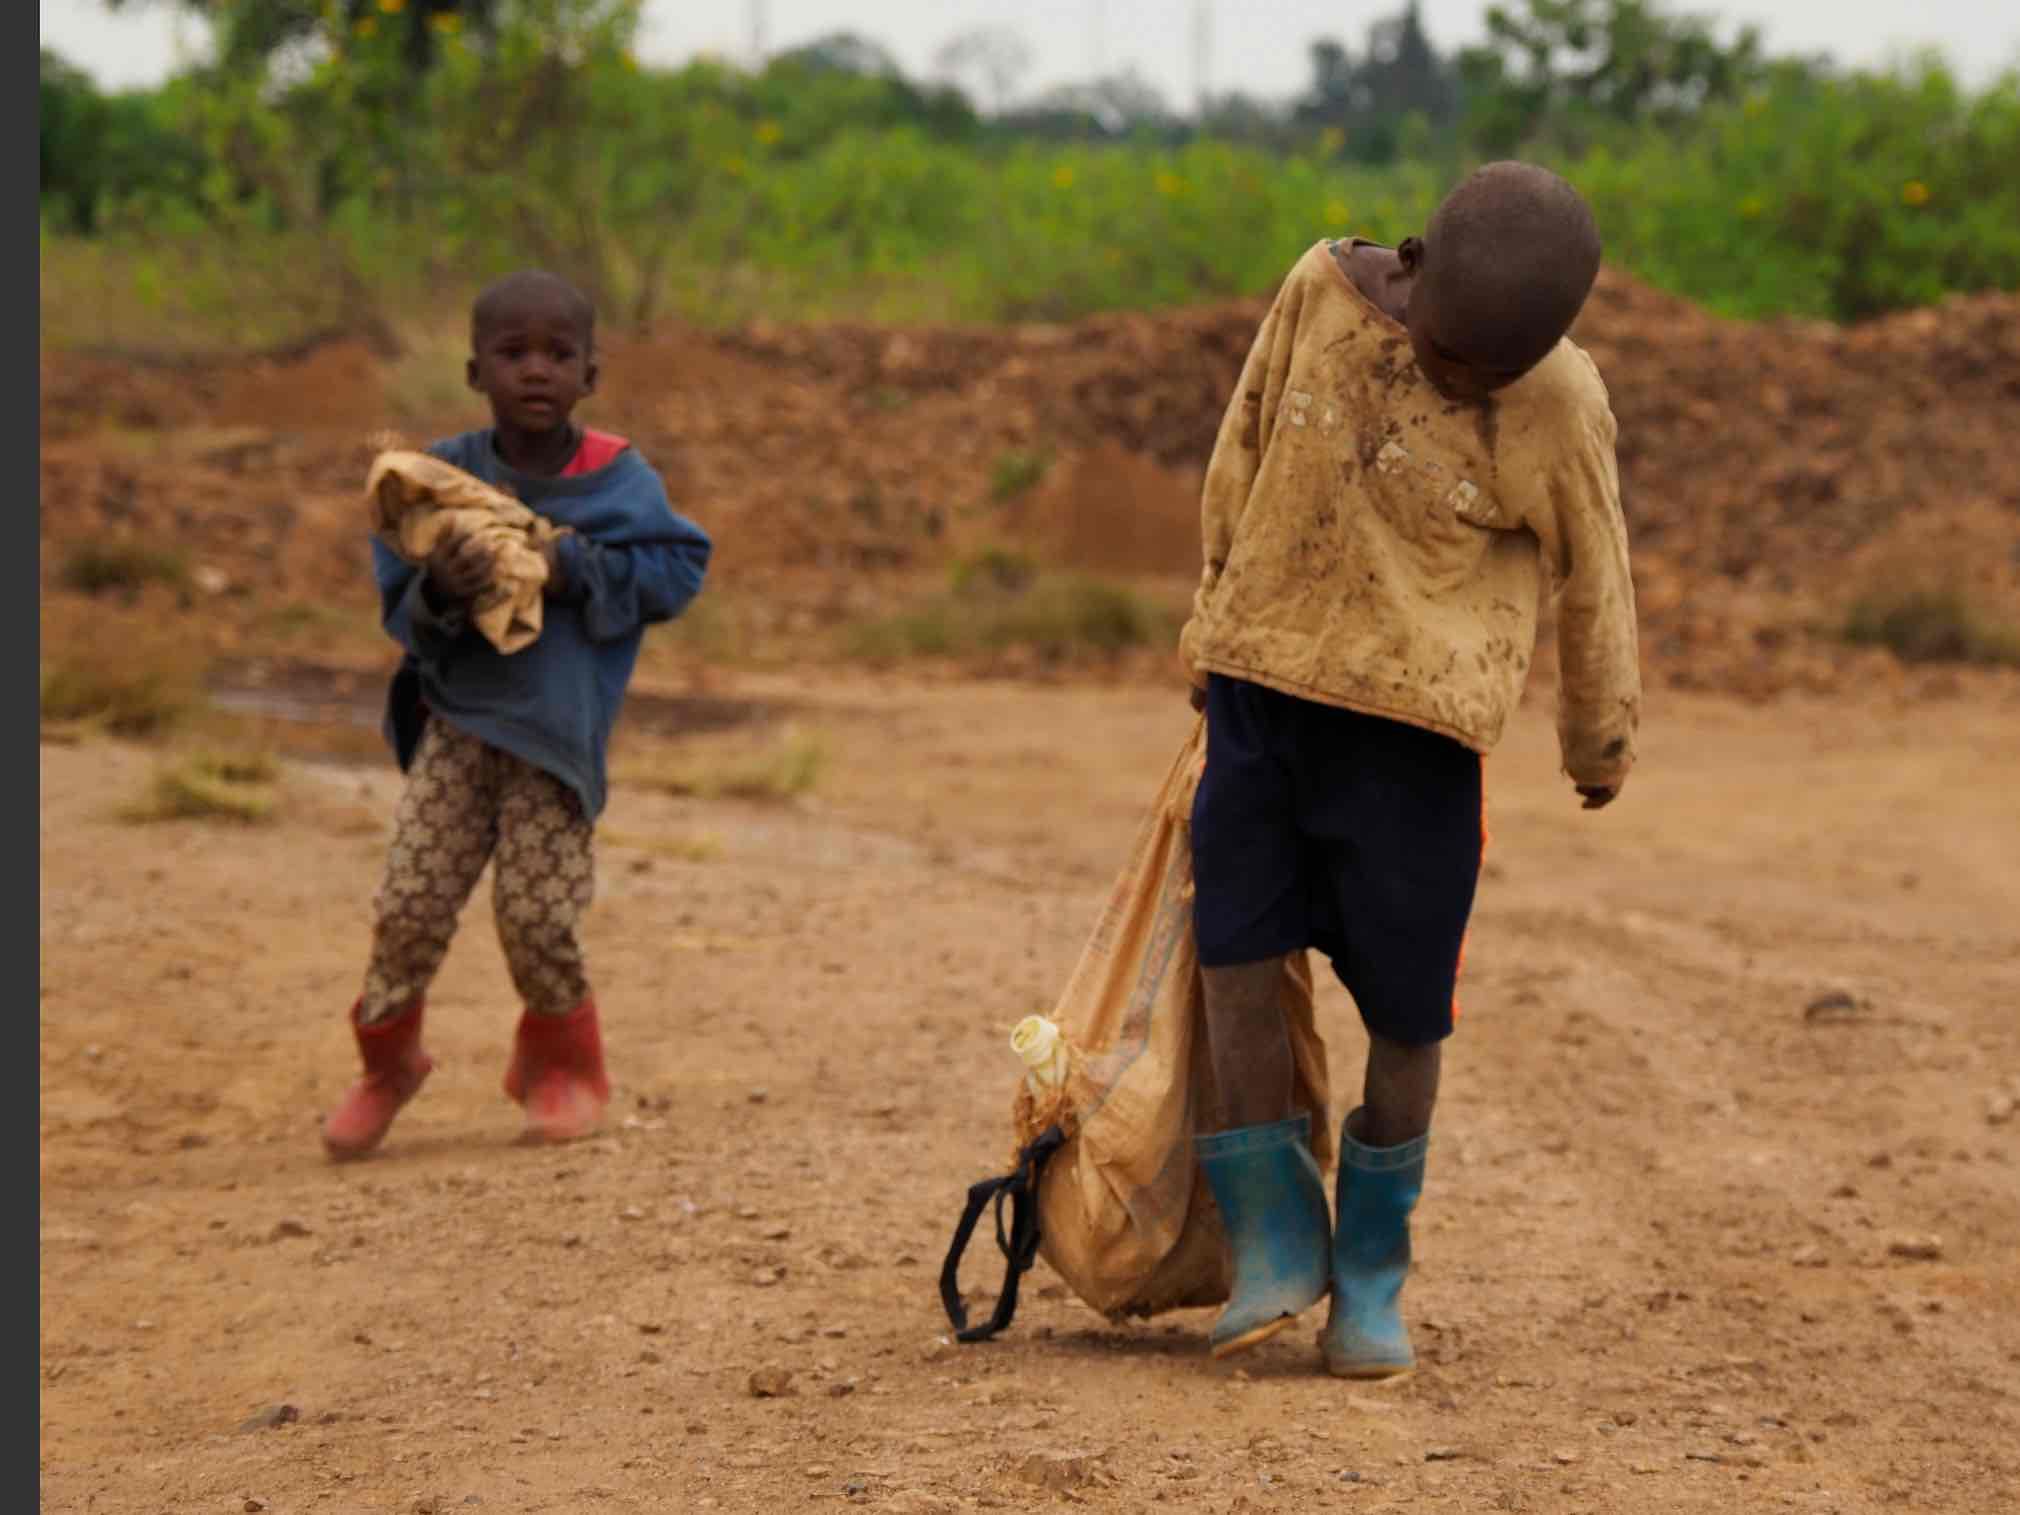 Abraham, 6, and Acili, 4, help their mother Debola Kunda to crush and carry stones. The levels of toxic lead are extreme but she said: ‘We know about that but what can we do when there are no others at home to take care of the children? How will we eat if we stay at home.’ Image by Larry C. Price. Zambia, 2017.